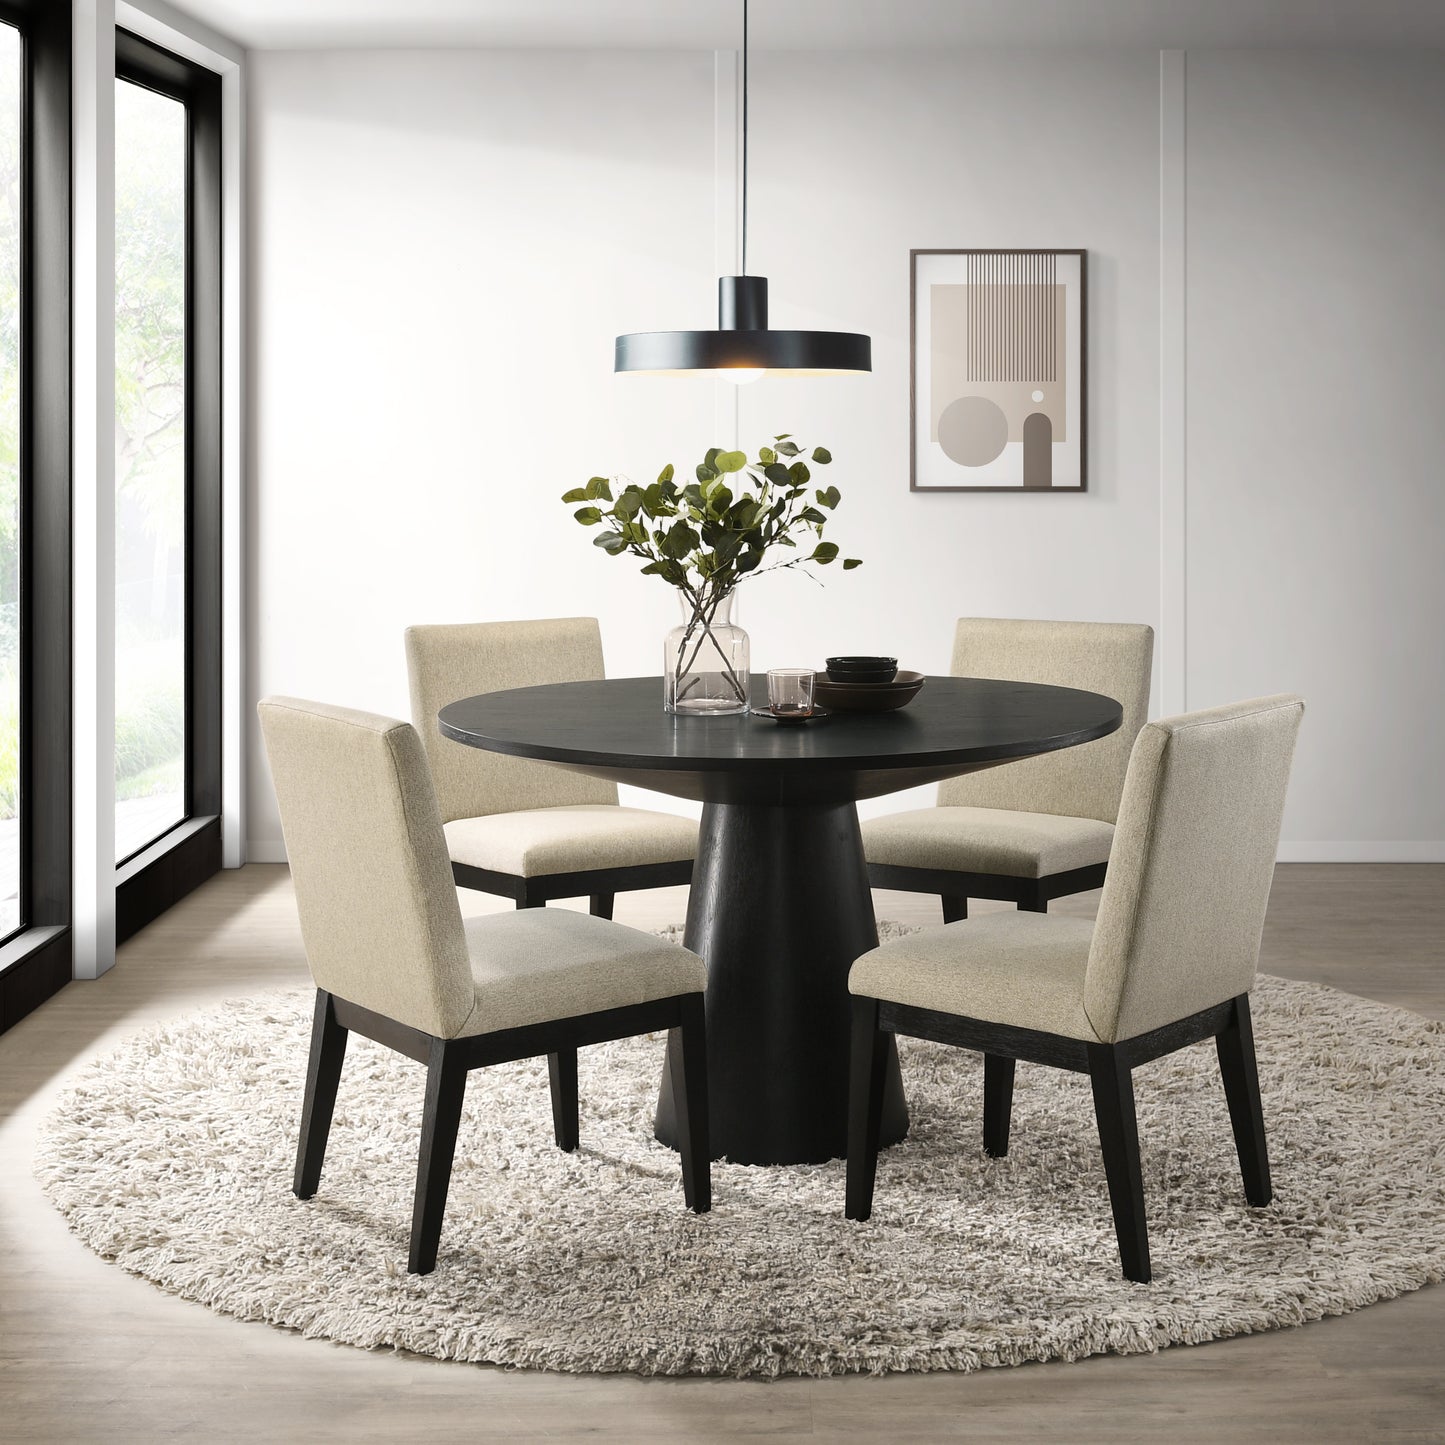 Roundhill Furniture Rocco Contemporary Dining Set, Round Pedestal Table with 4 Chairs